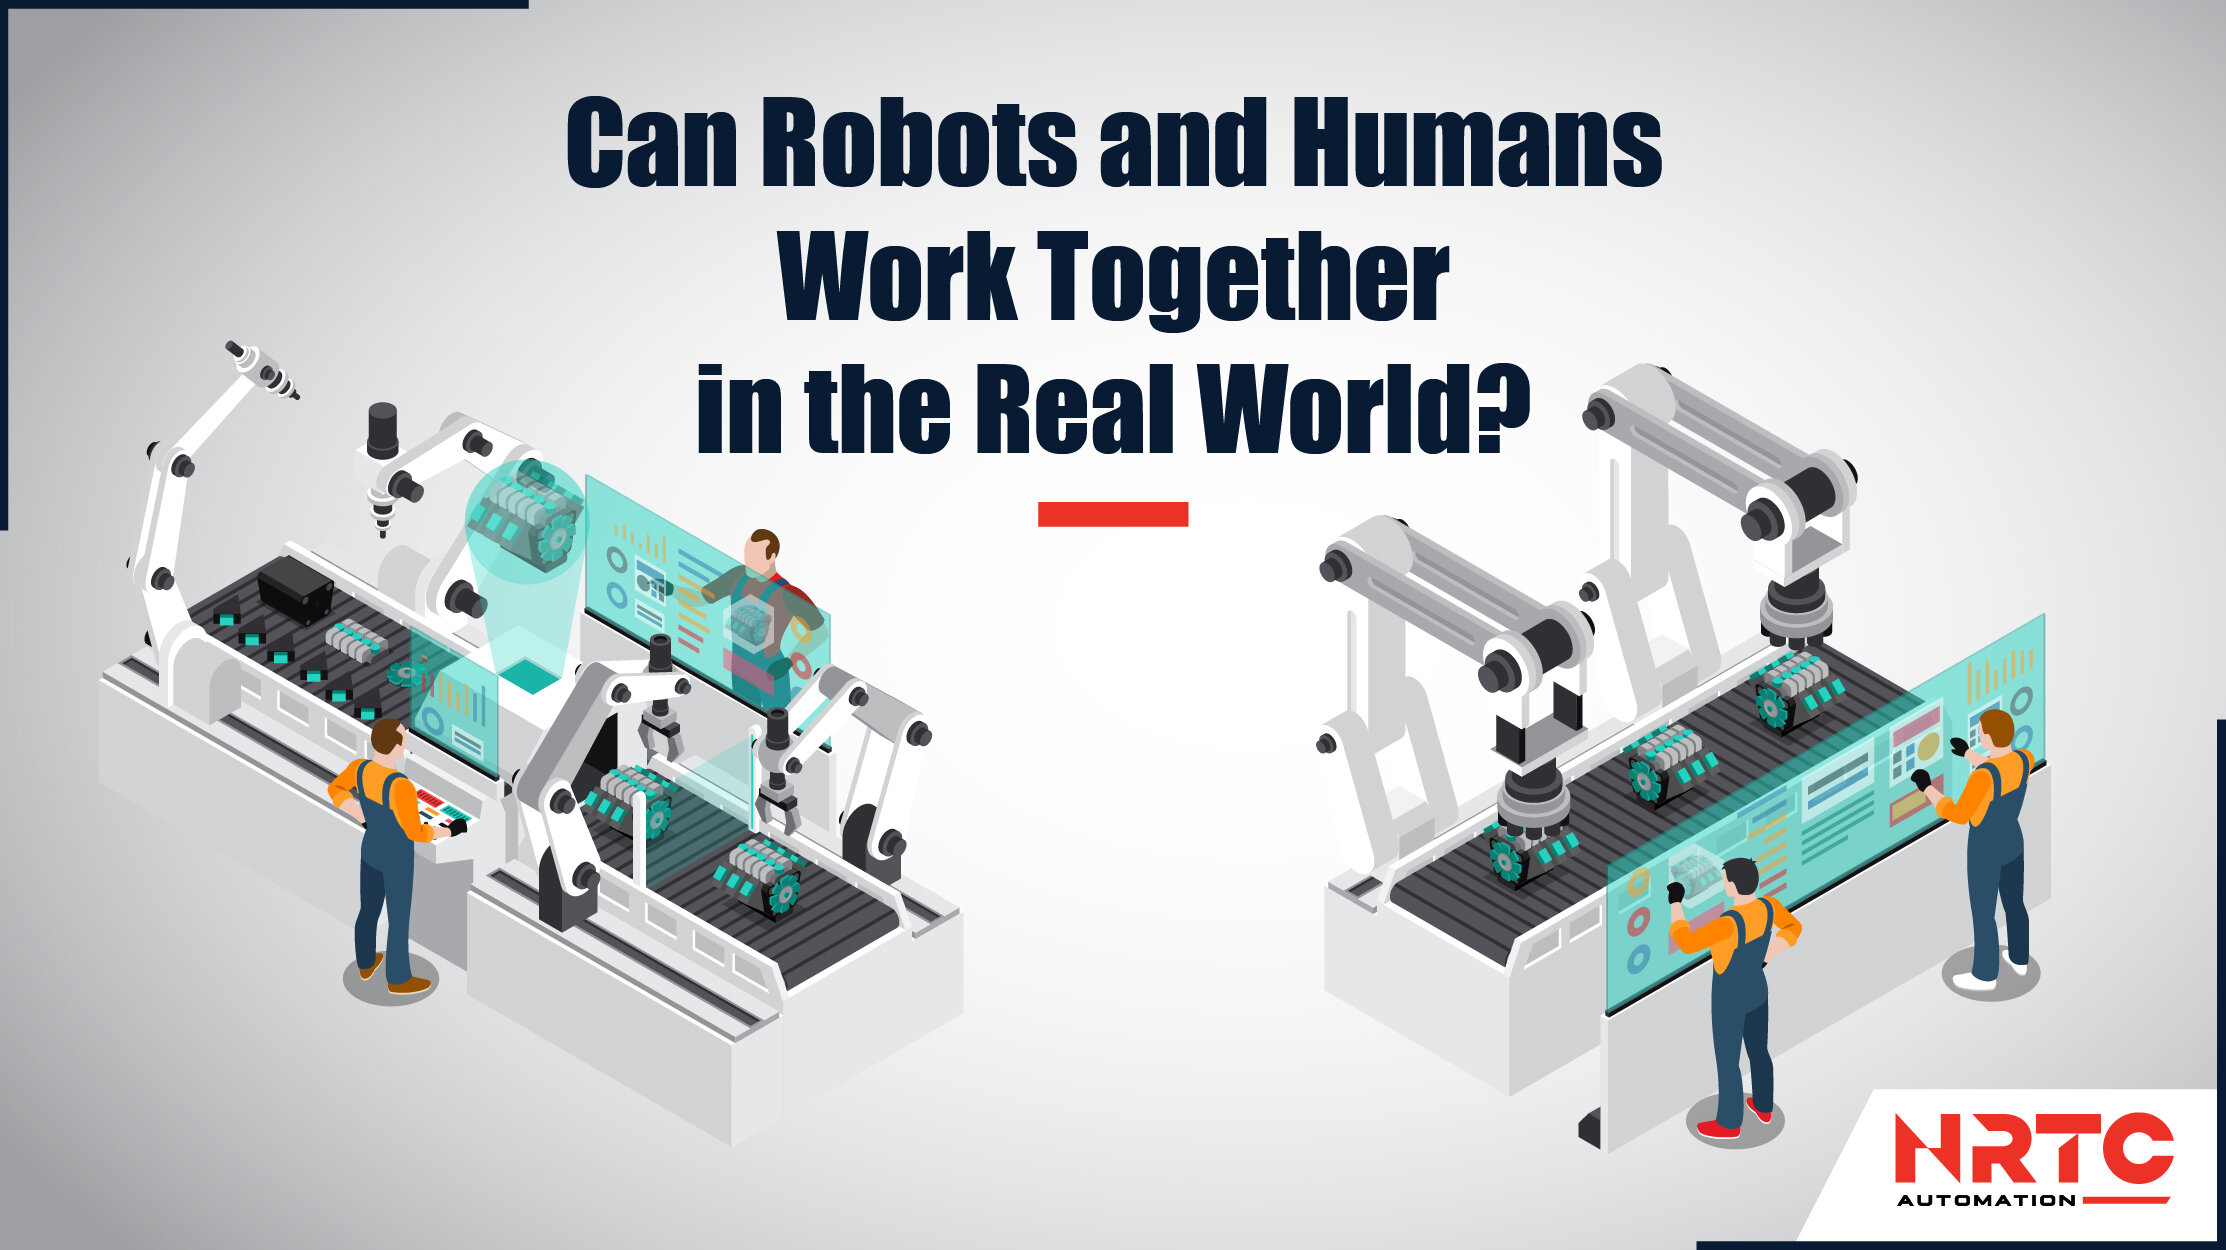 Can Robots and Together in the Real World? — Automation